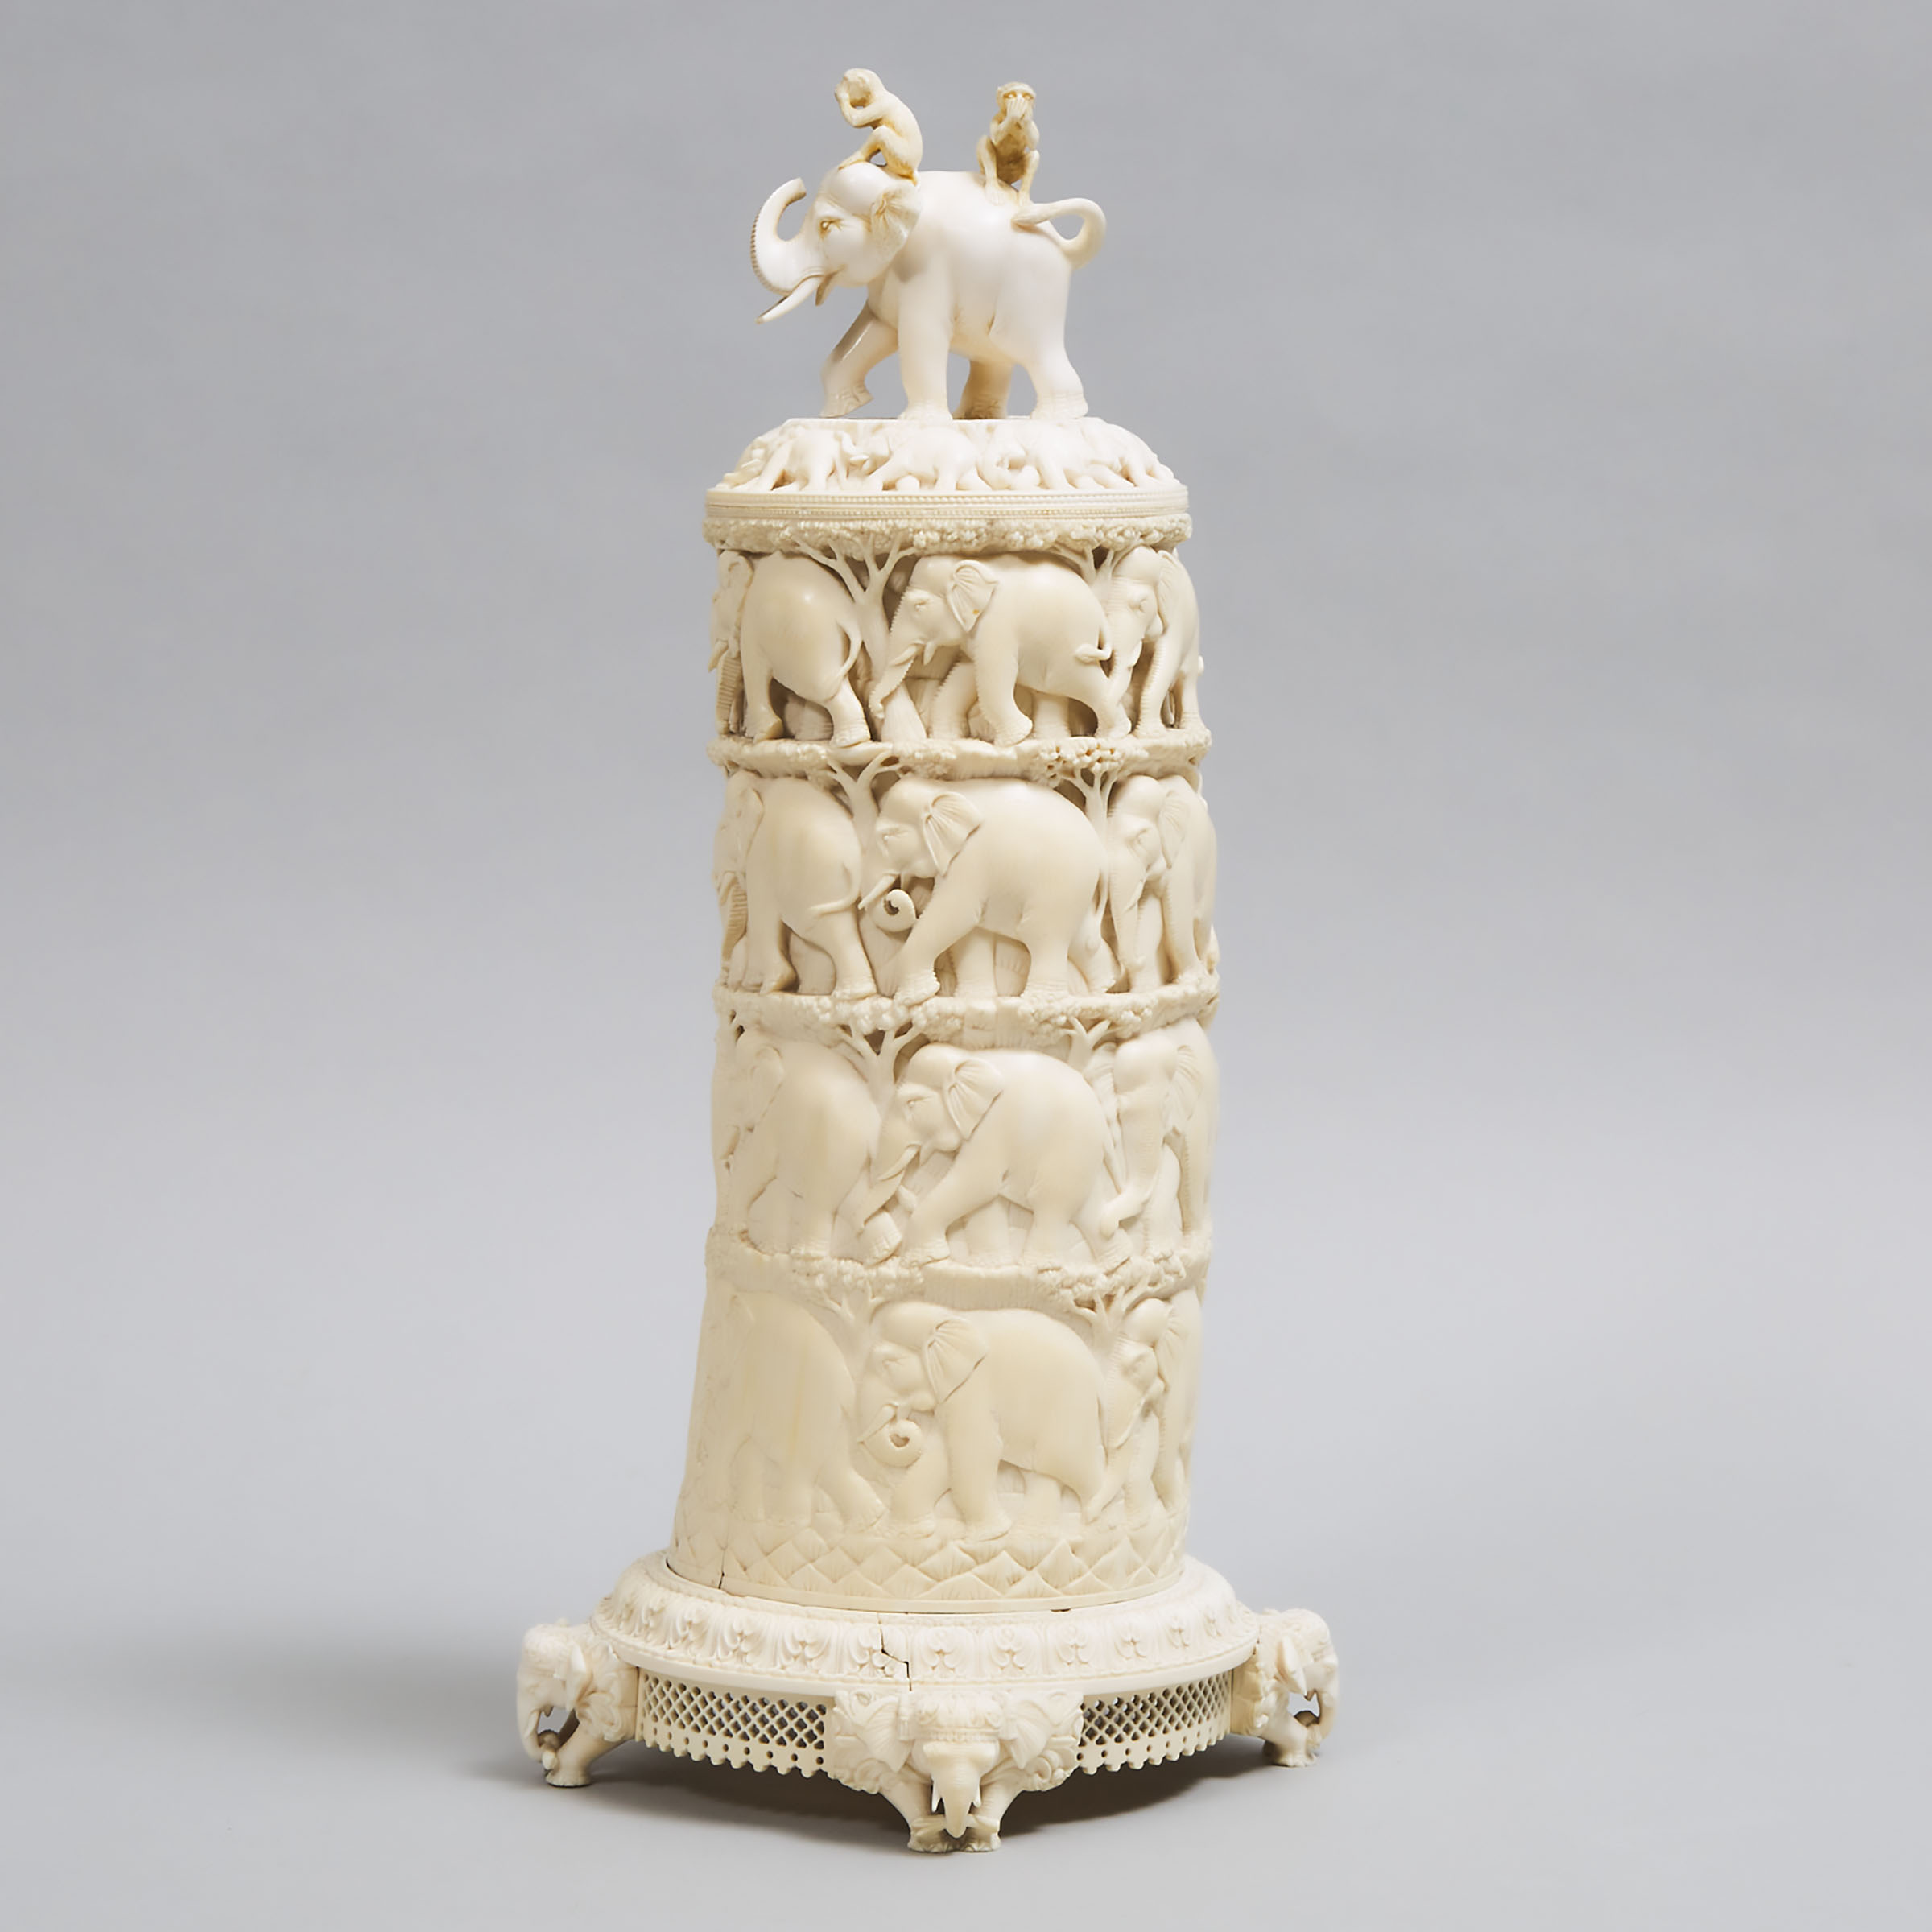 Indian Carved Ivory Elephant Parade Tower Form Covered Presentation Vase, 19th century